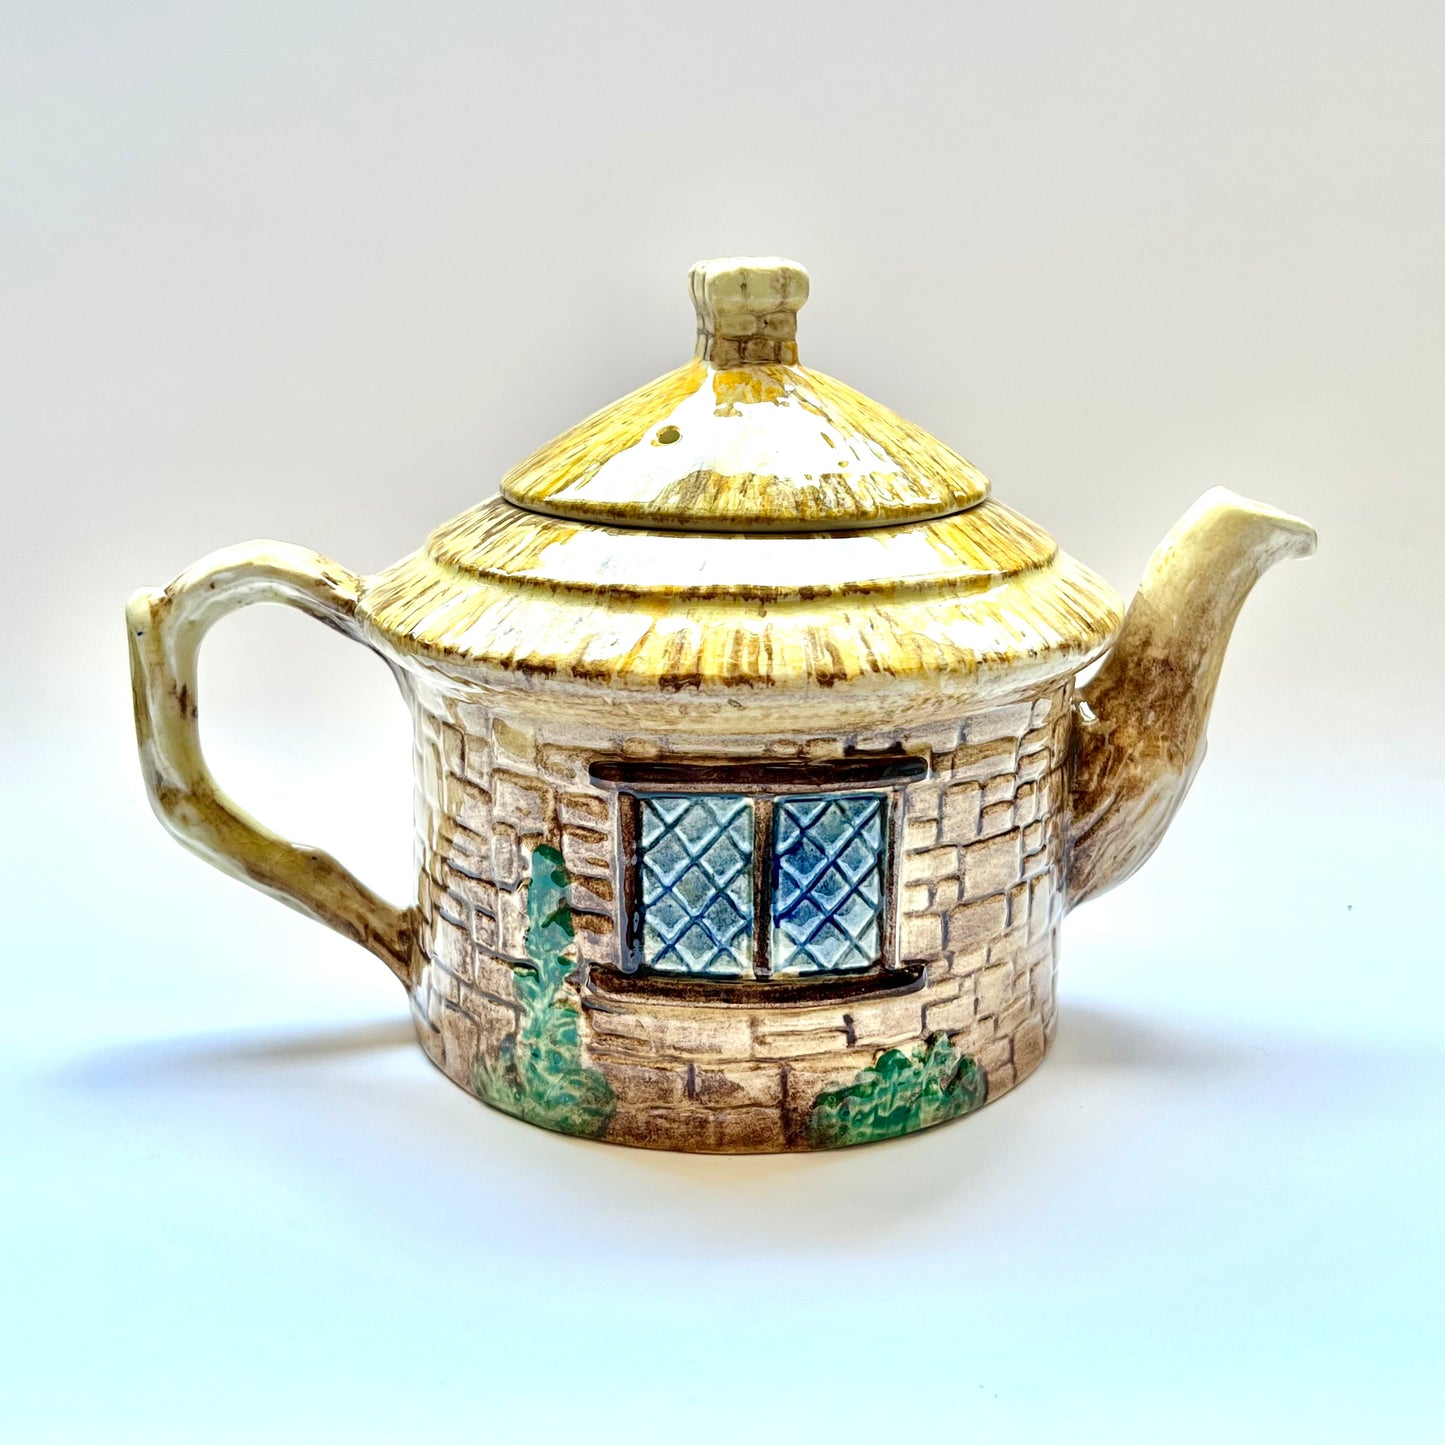 Vintage novelty Staffordshire Croft pattern cottageware teapot by SylvaC 1930s to 50s.